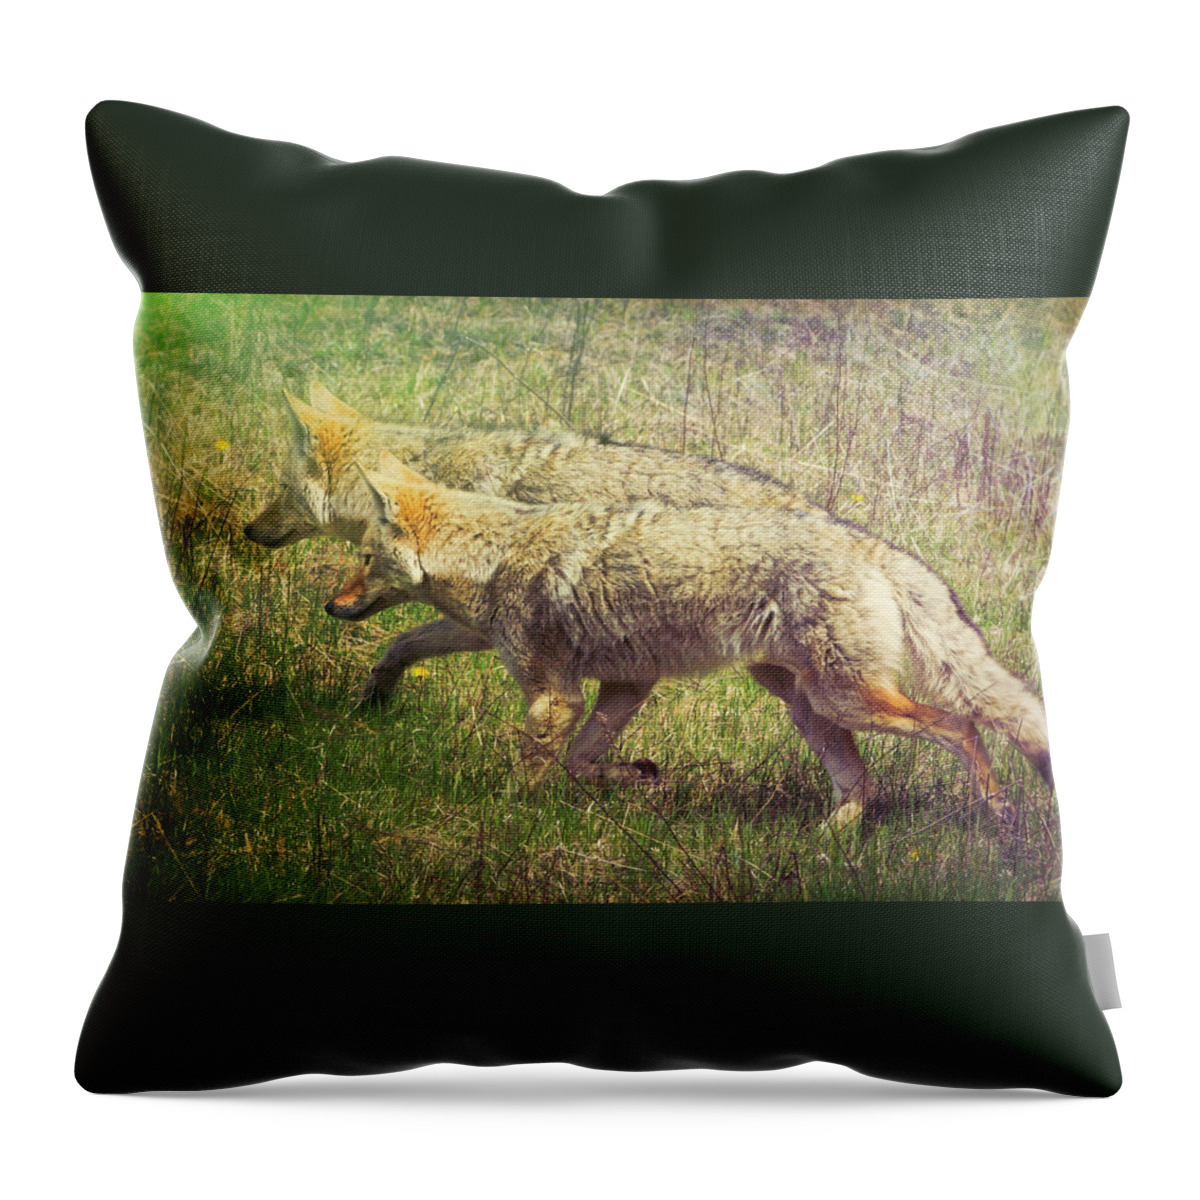 Animal Throw Pillow featuring the photograph Two Coyotes by Natalie Rotman Cote